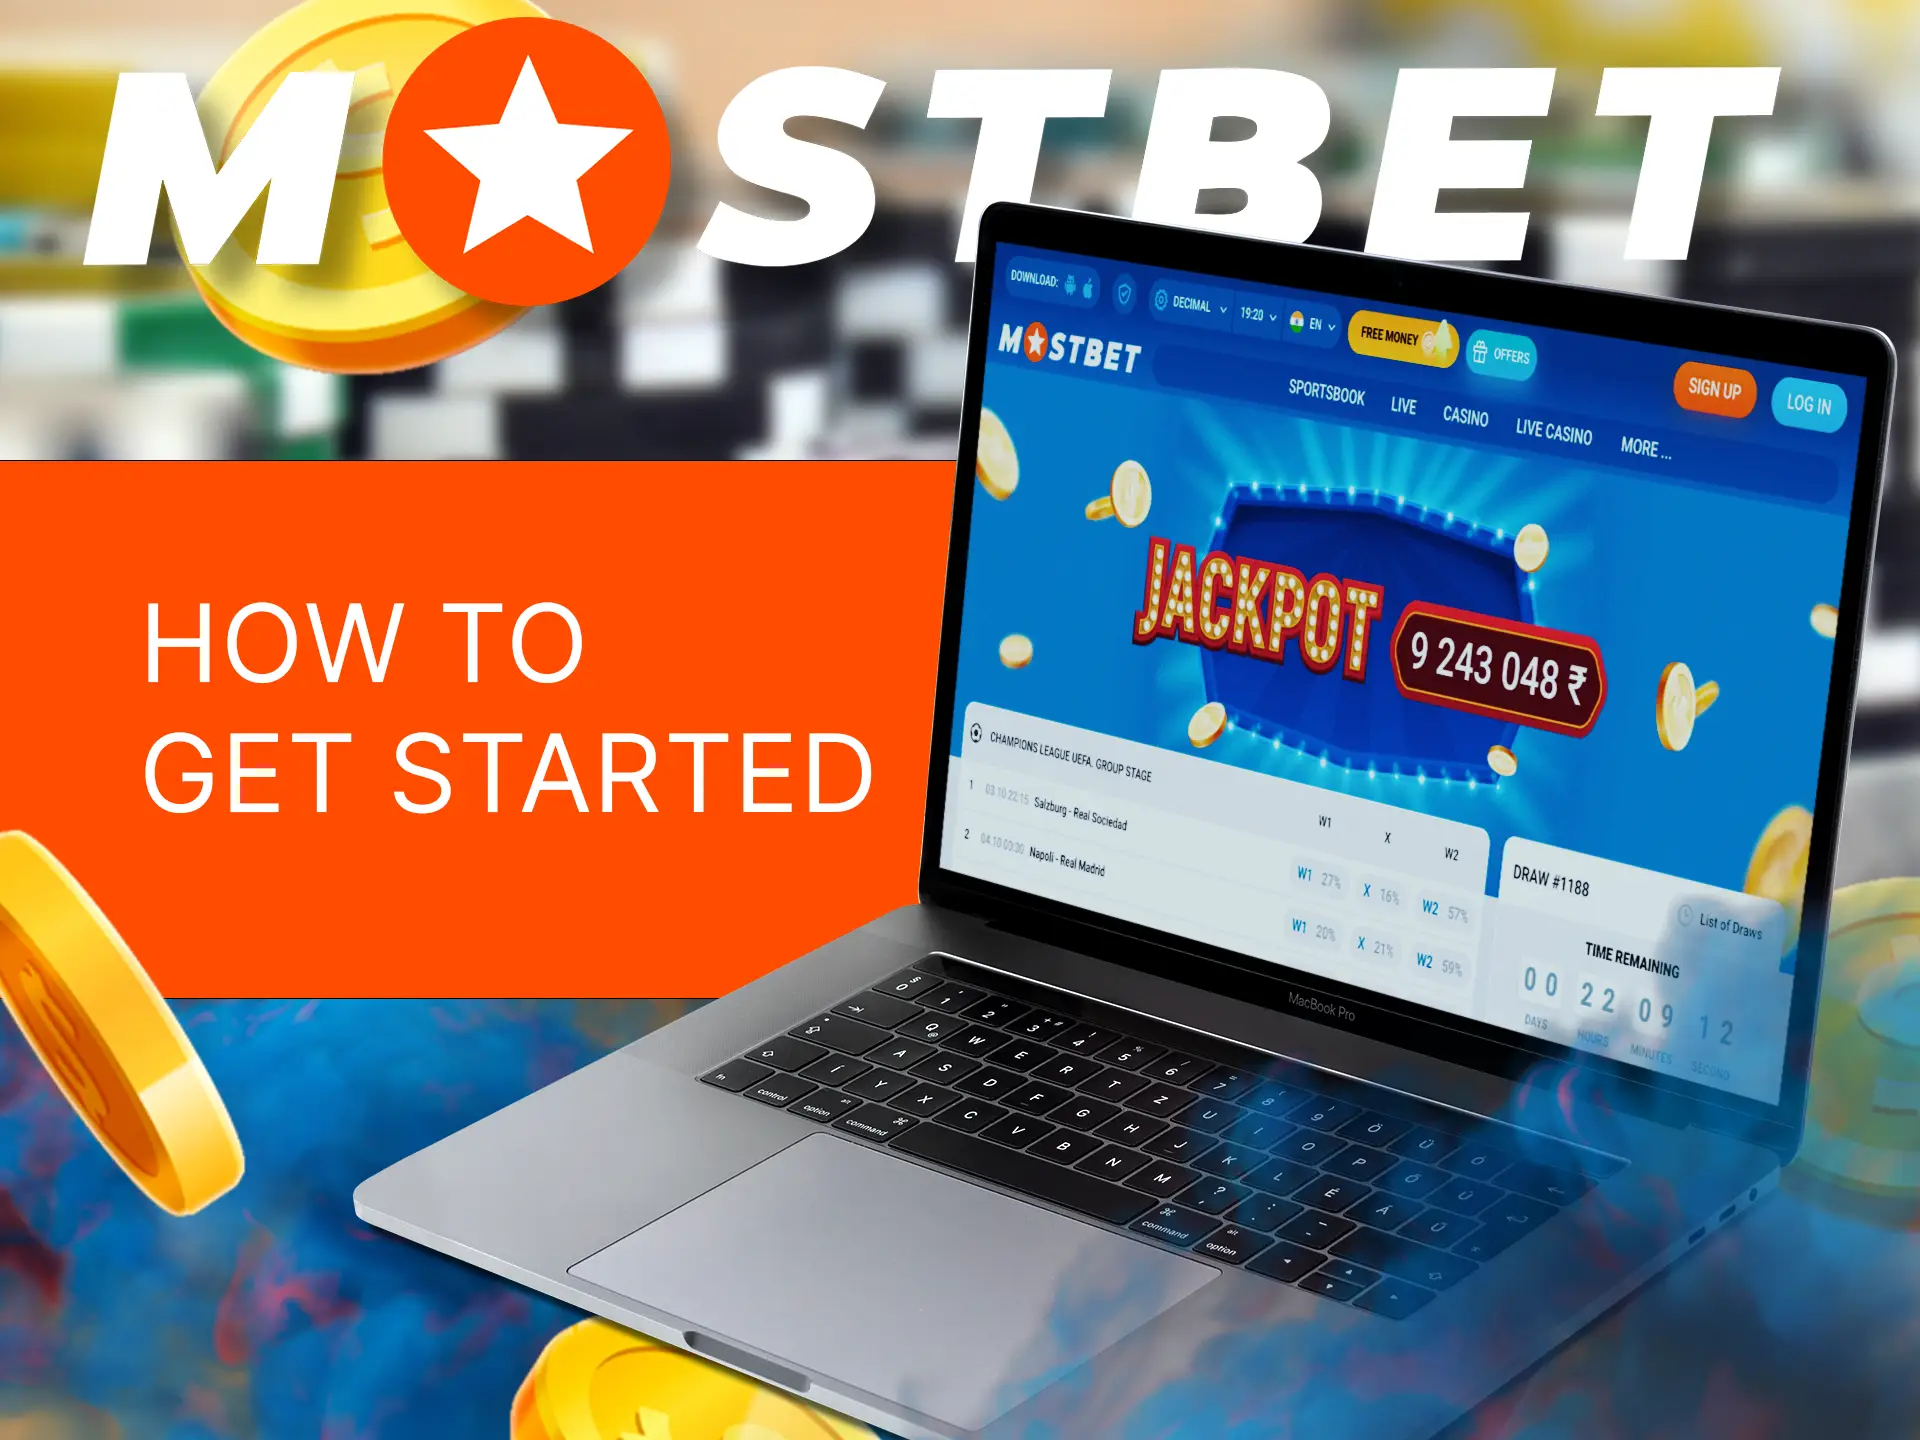 Register on the site to get all the features of Mostbet Casino.